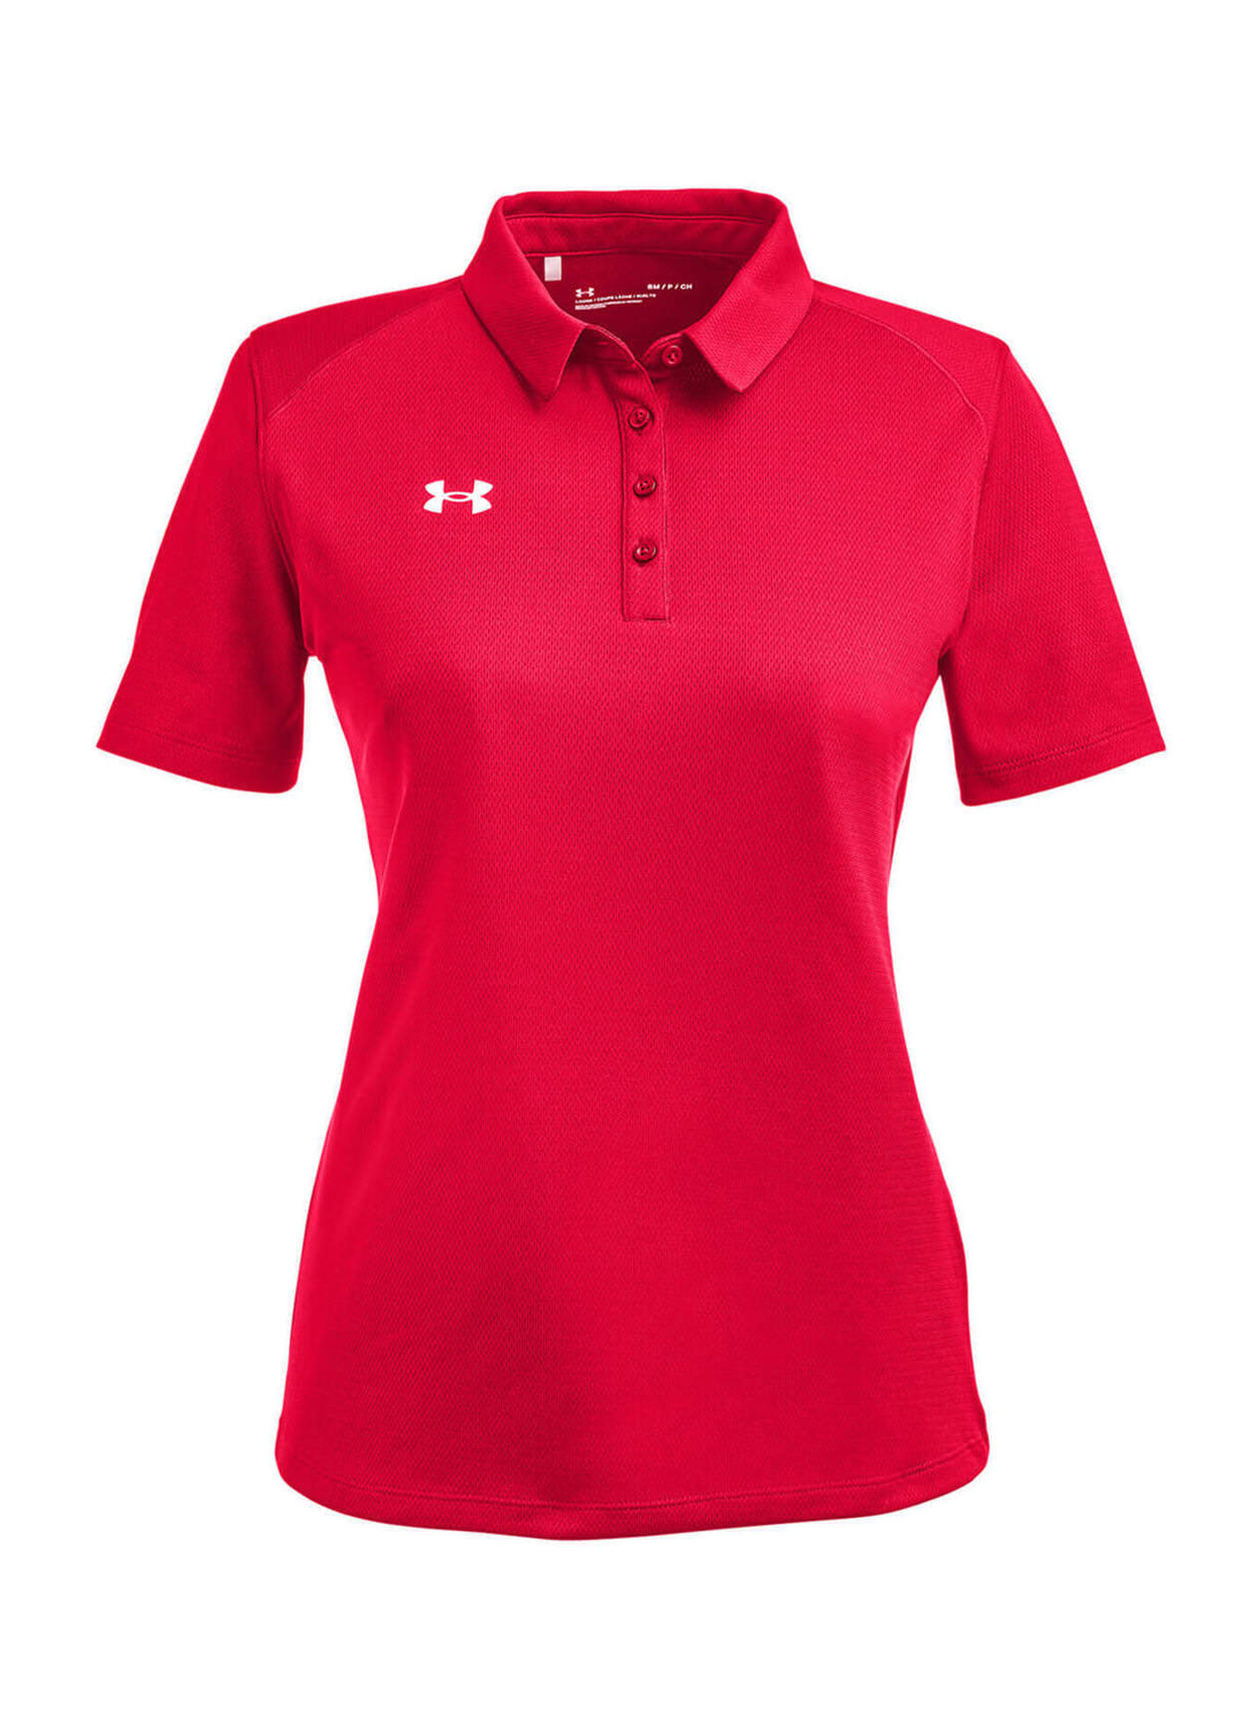 Under Armour Women's Red Tech Polo